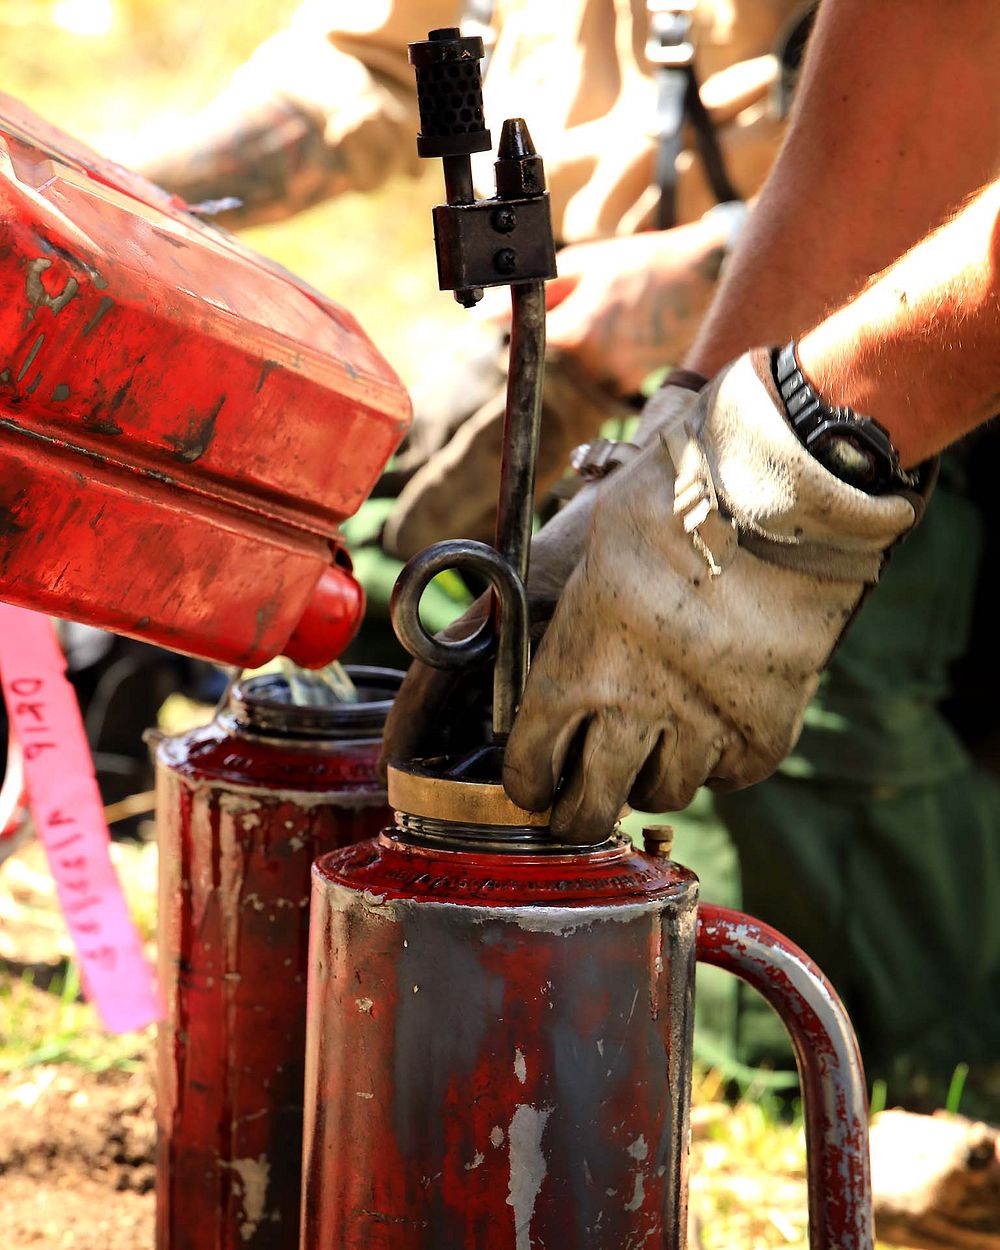 Fuels Management, Drip TorchesIn this photo firefighters are preparing drip torches to be used in a fuels management…